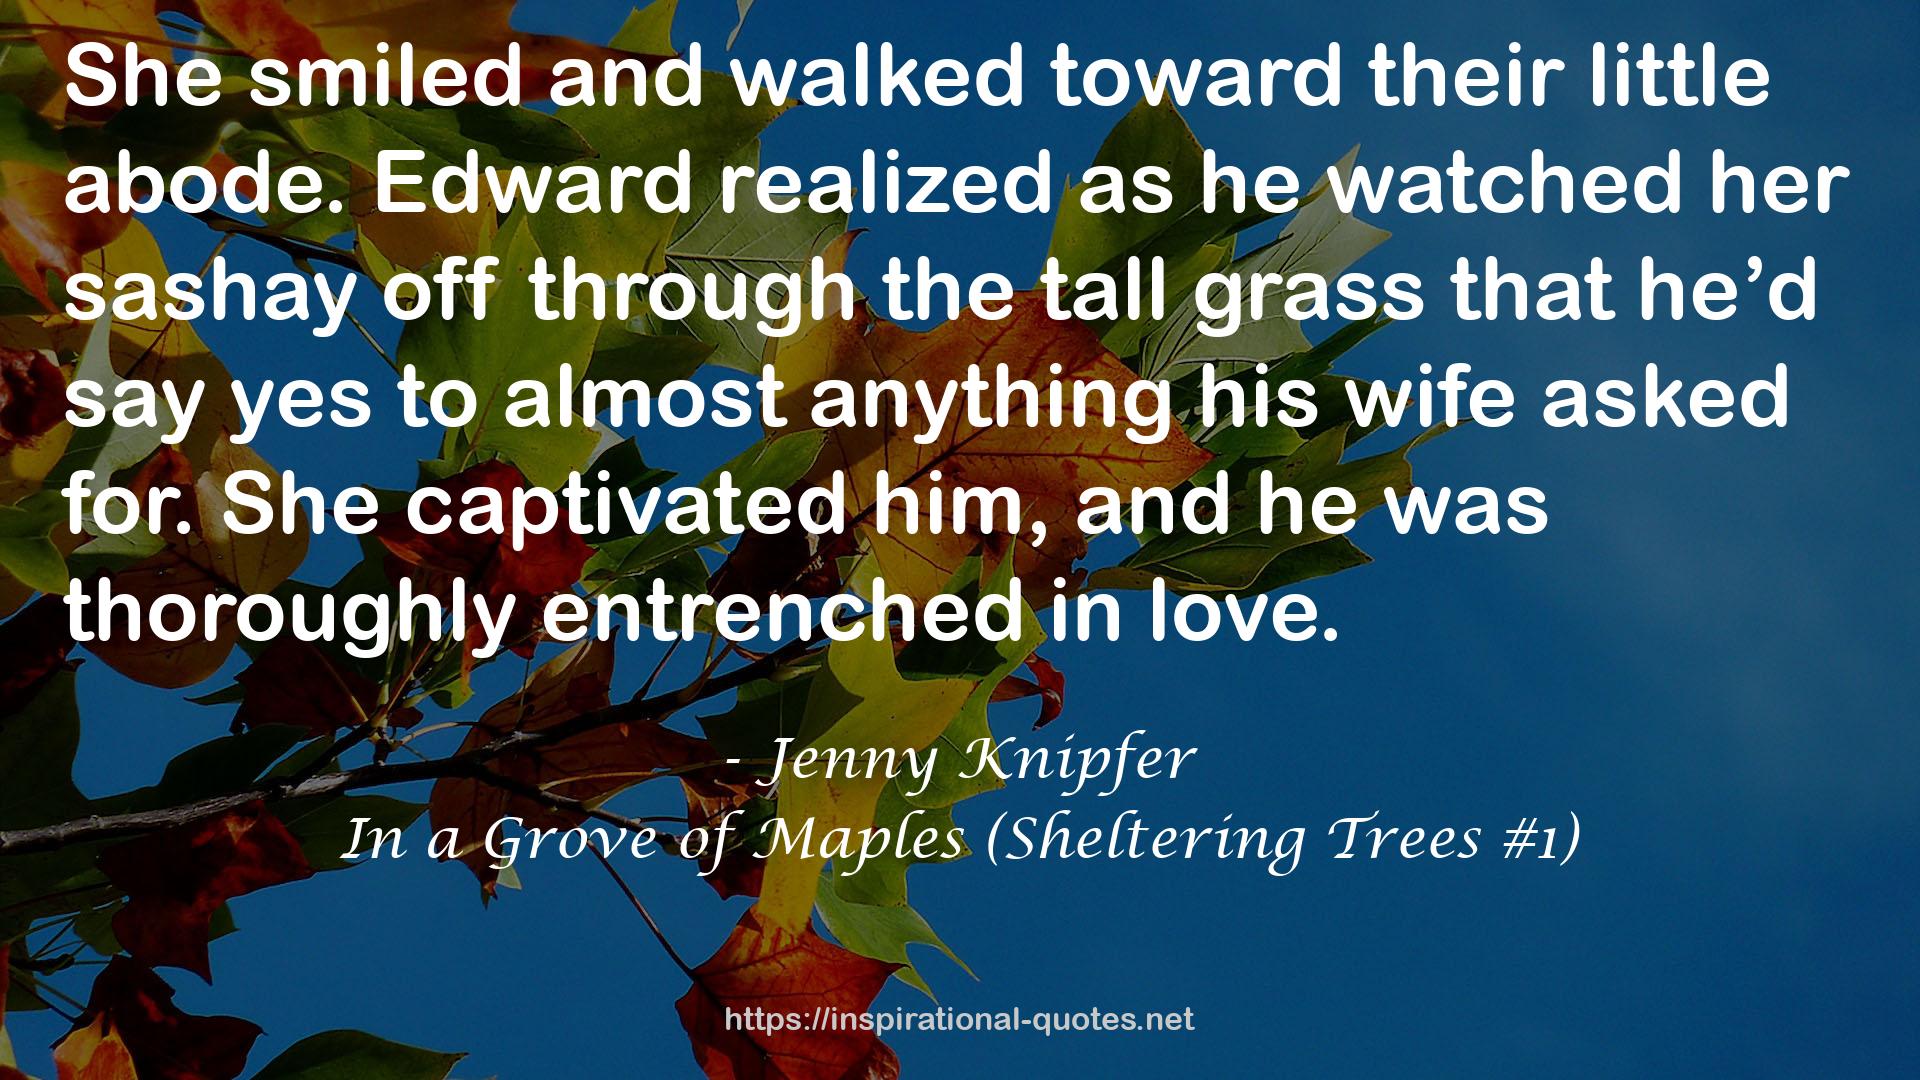 In a Grove of Maples (Sheltering Trees #1) QUOTES